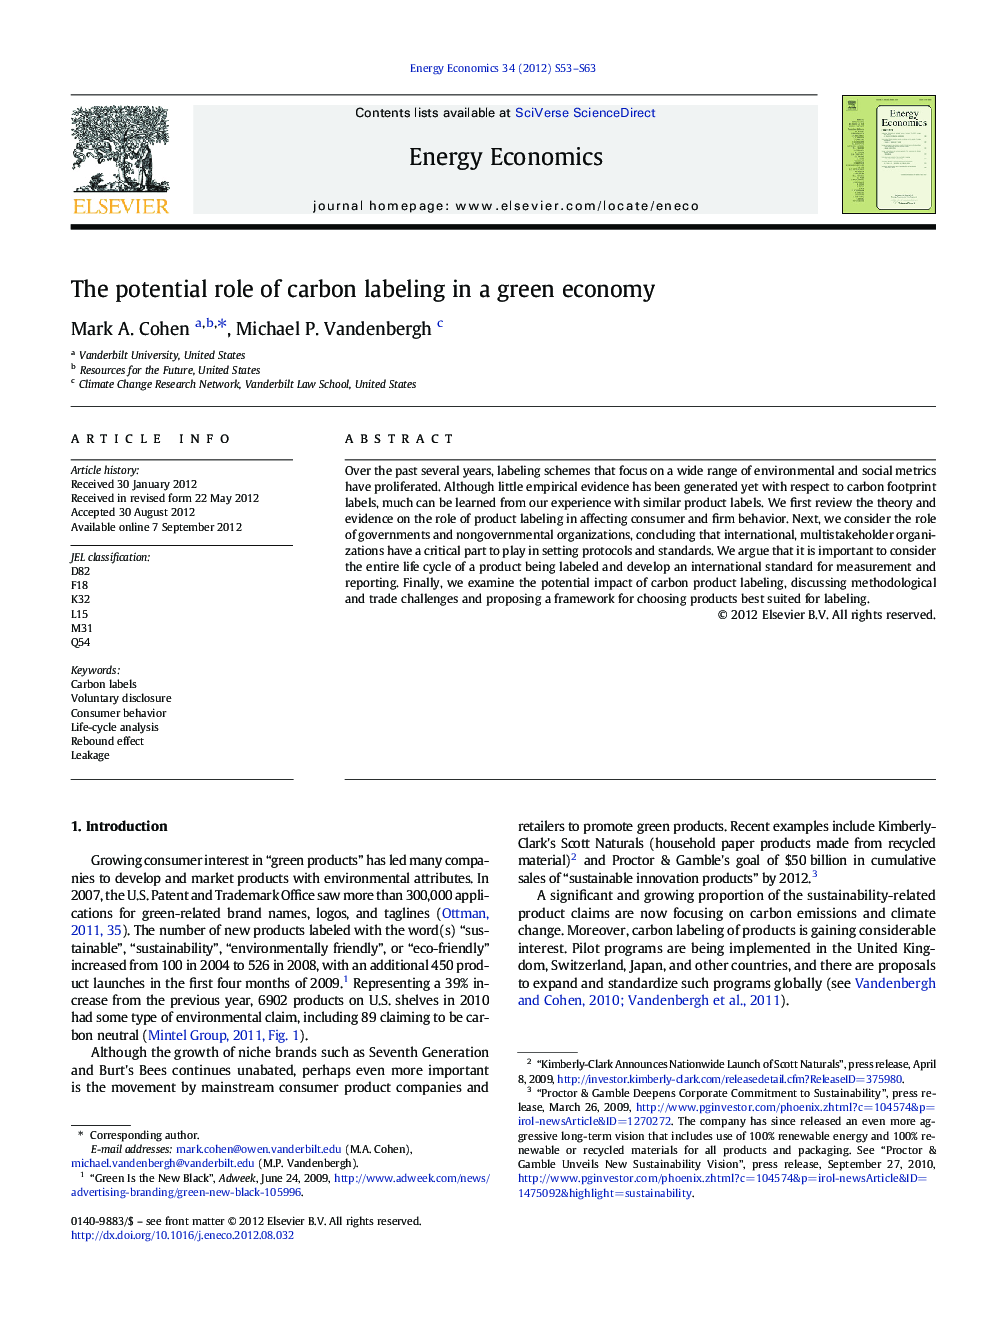 The potential role of carbon labeling in a green economy